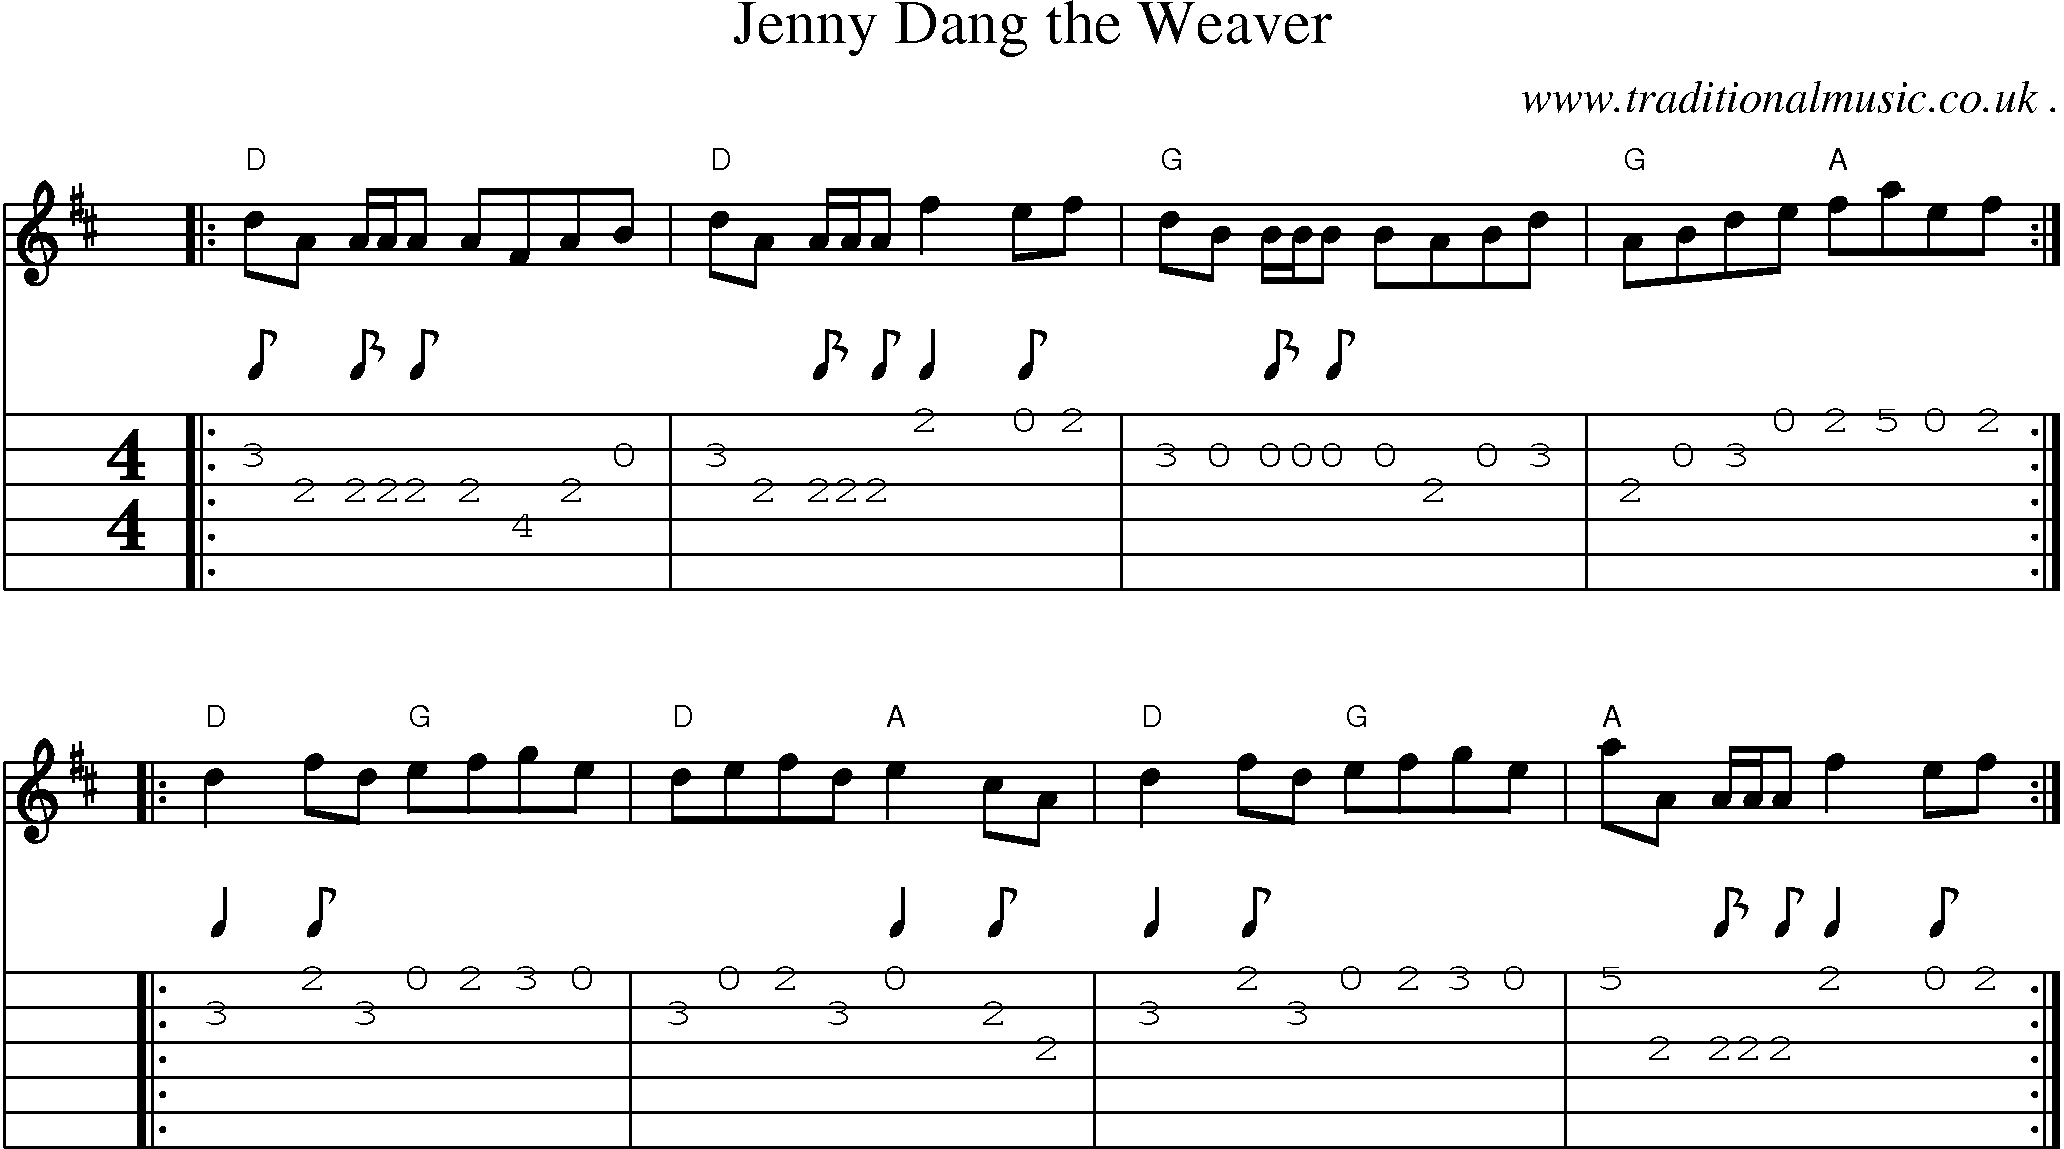 Sheet-music  score, Chords and Guitar Tabs for Jenny Dang The Weaver